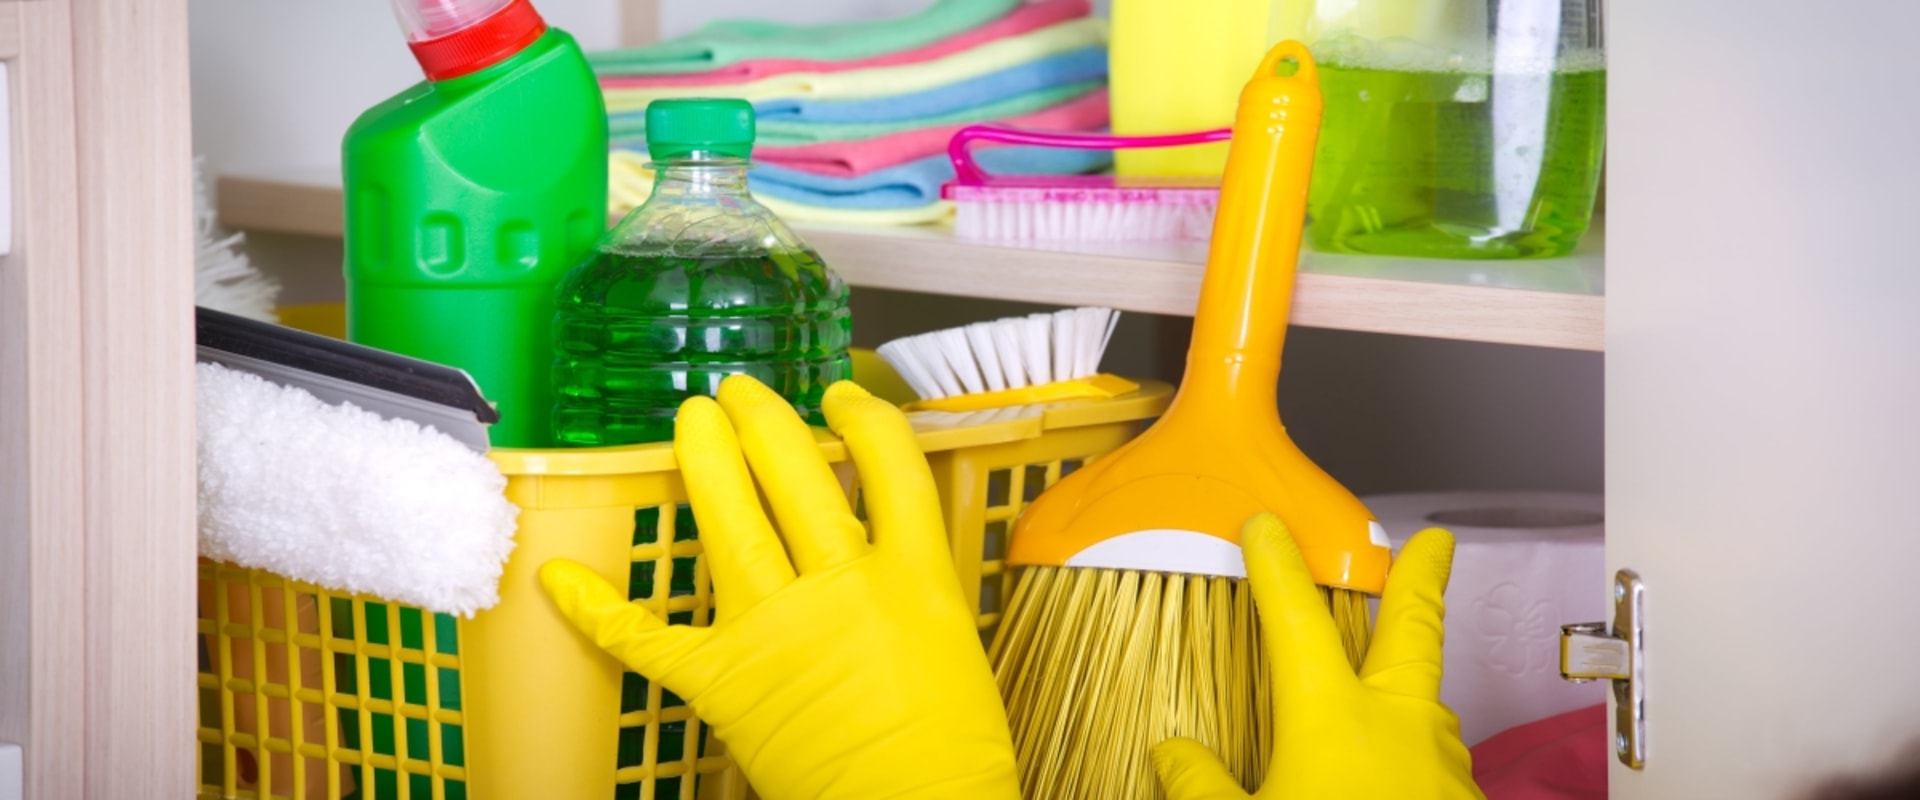 What are the most important steps to take when cleaning a house?